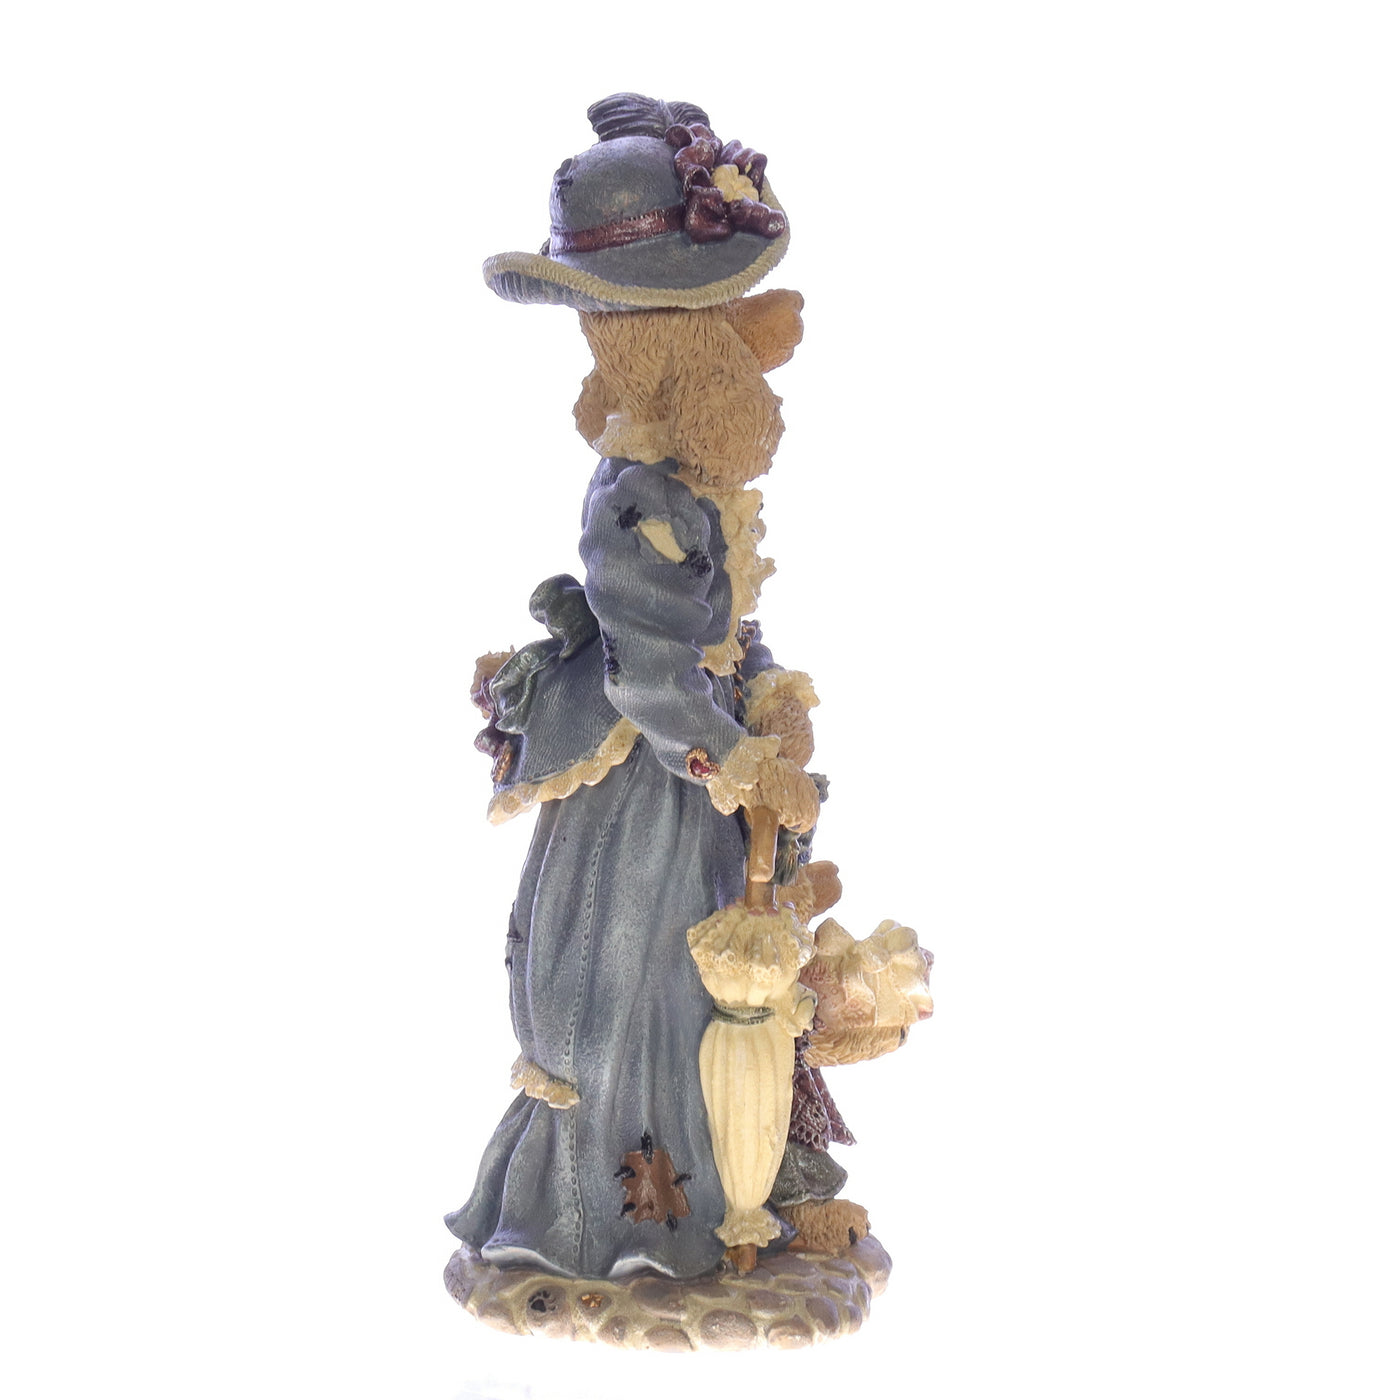 The_Folkstone_Collection_2875_Francoise_and_Suzanne_Crem_de_LaChien_Shopping_Figurine_1997 Right View